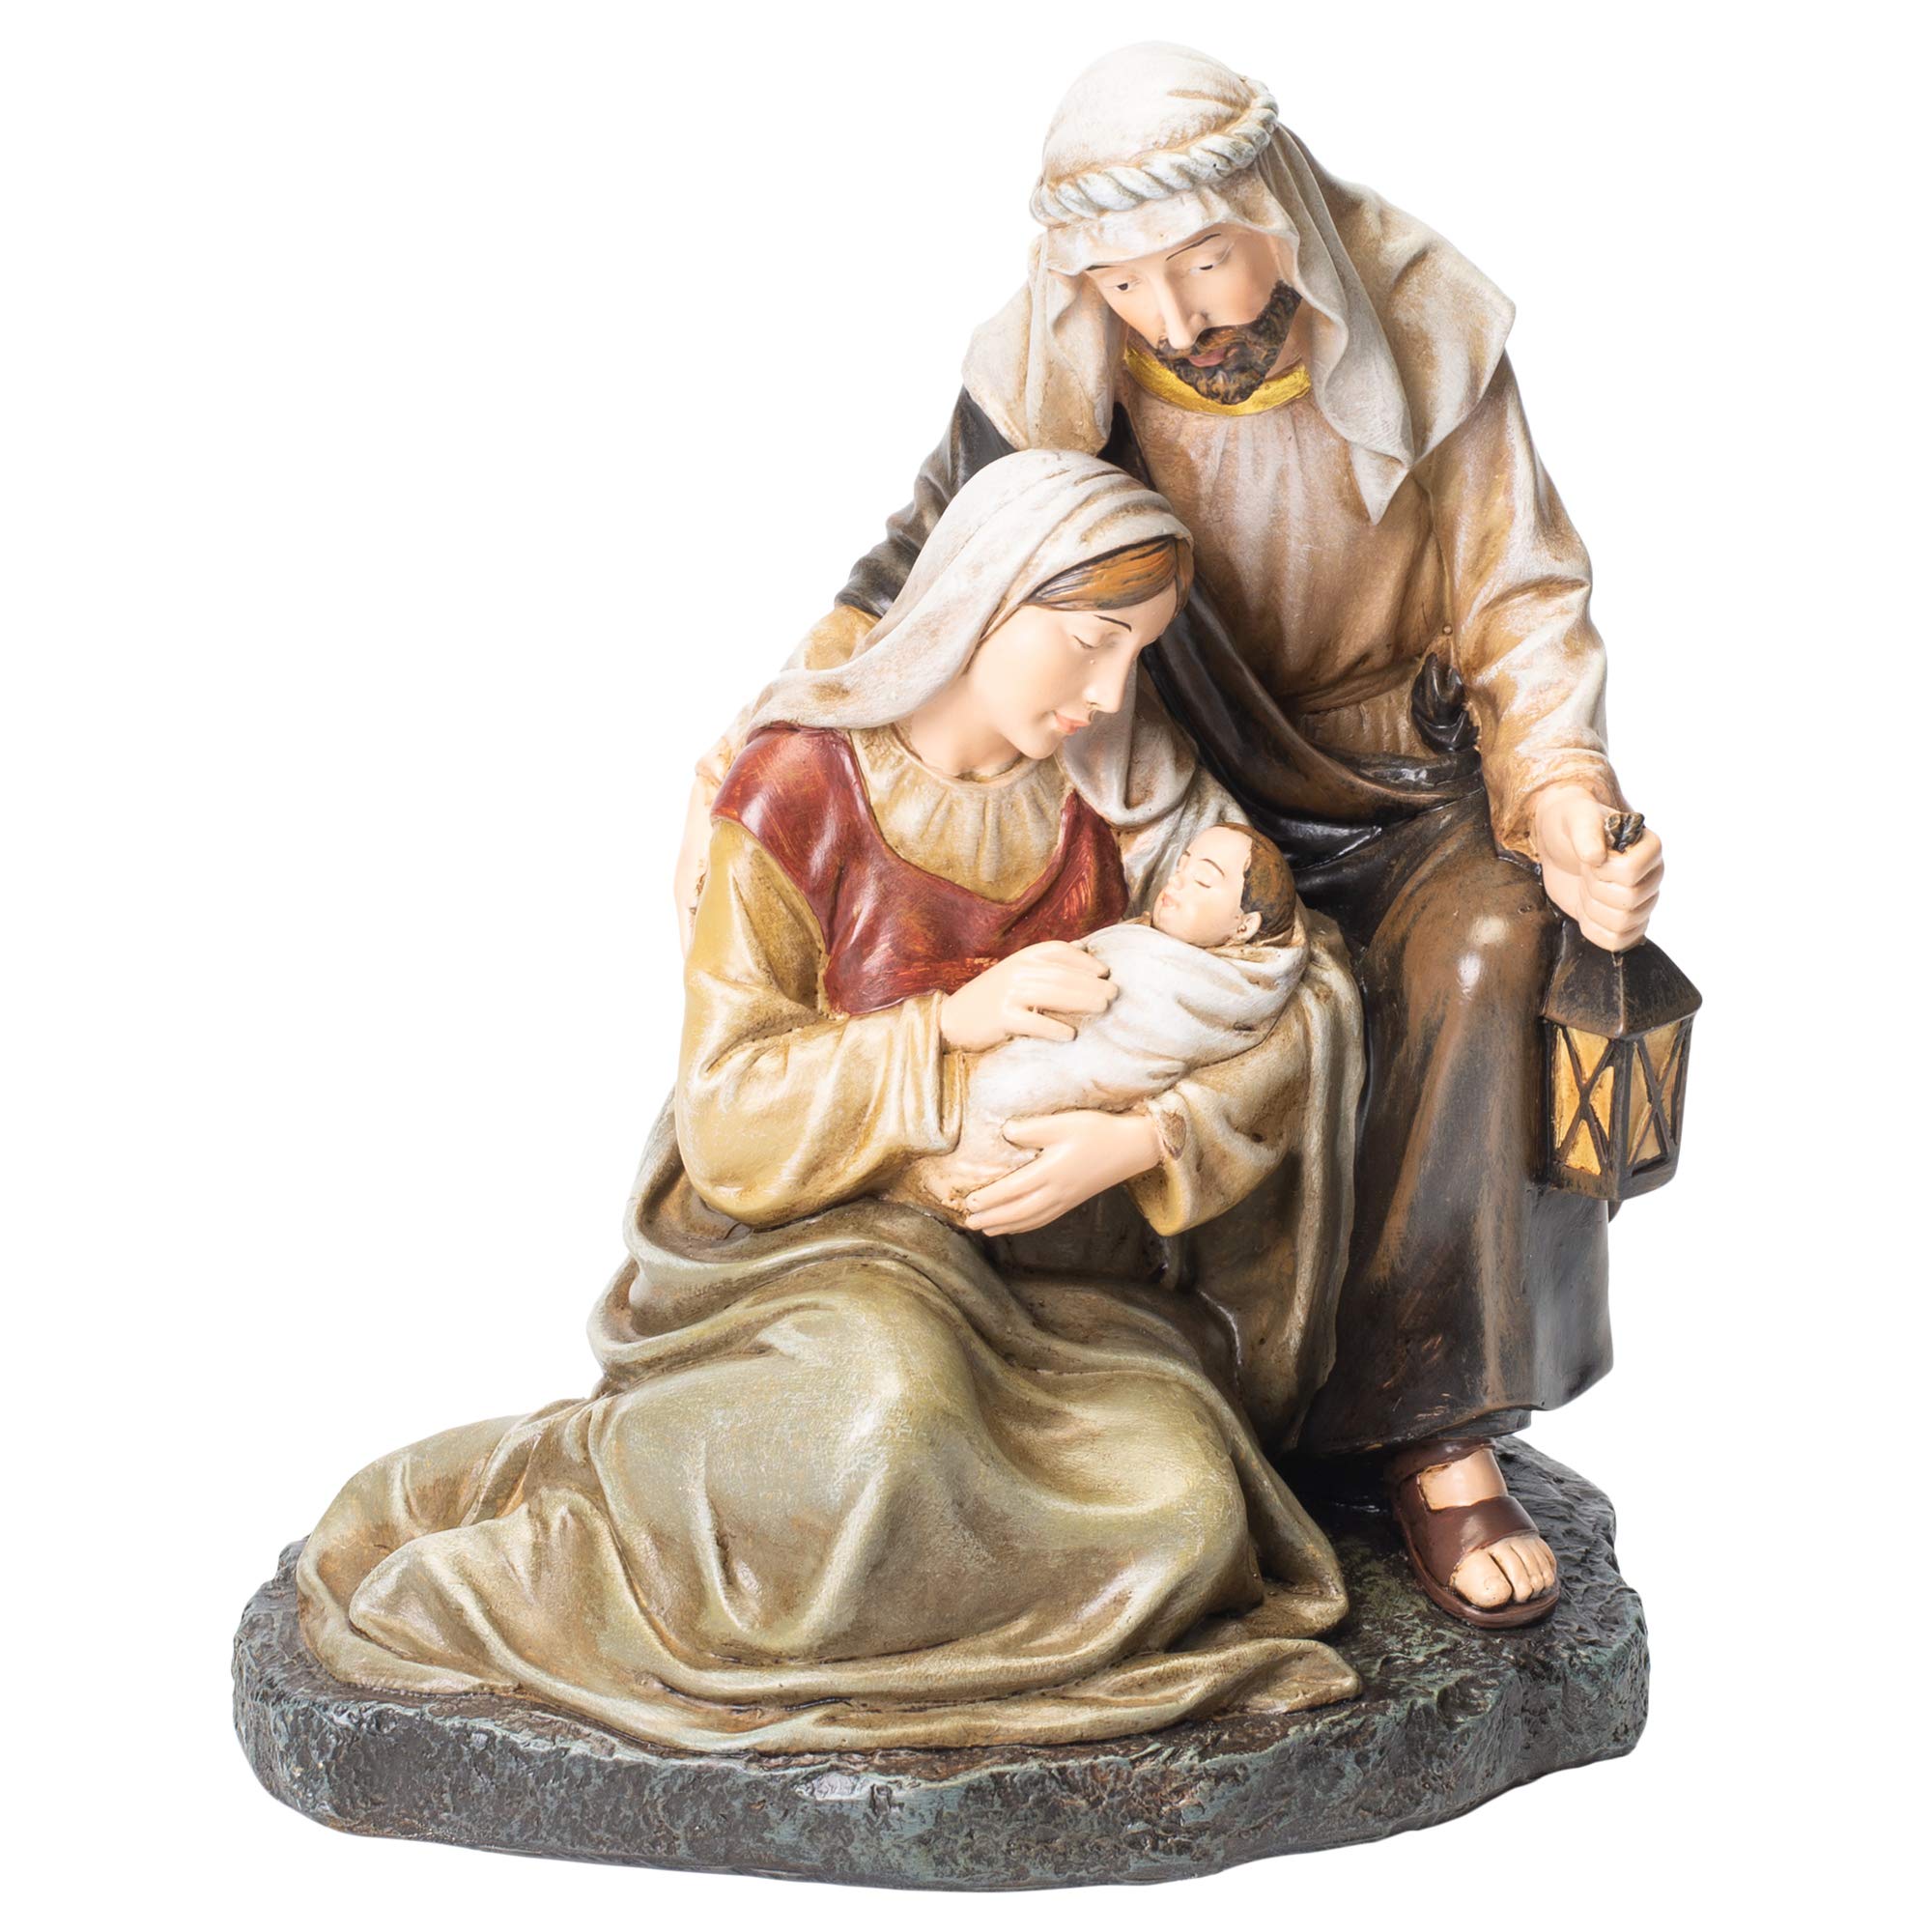 Napco Imports 8" Kneeling Holy Family Christmas Table Top Figurine